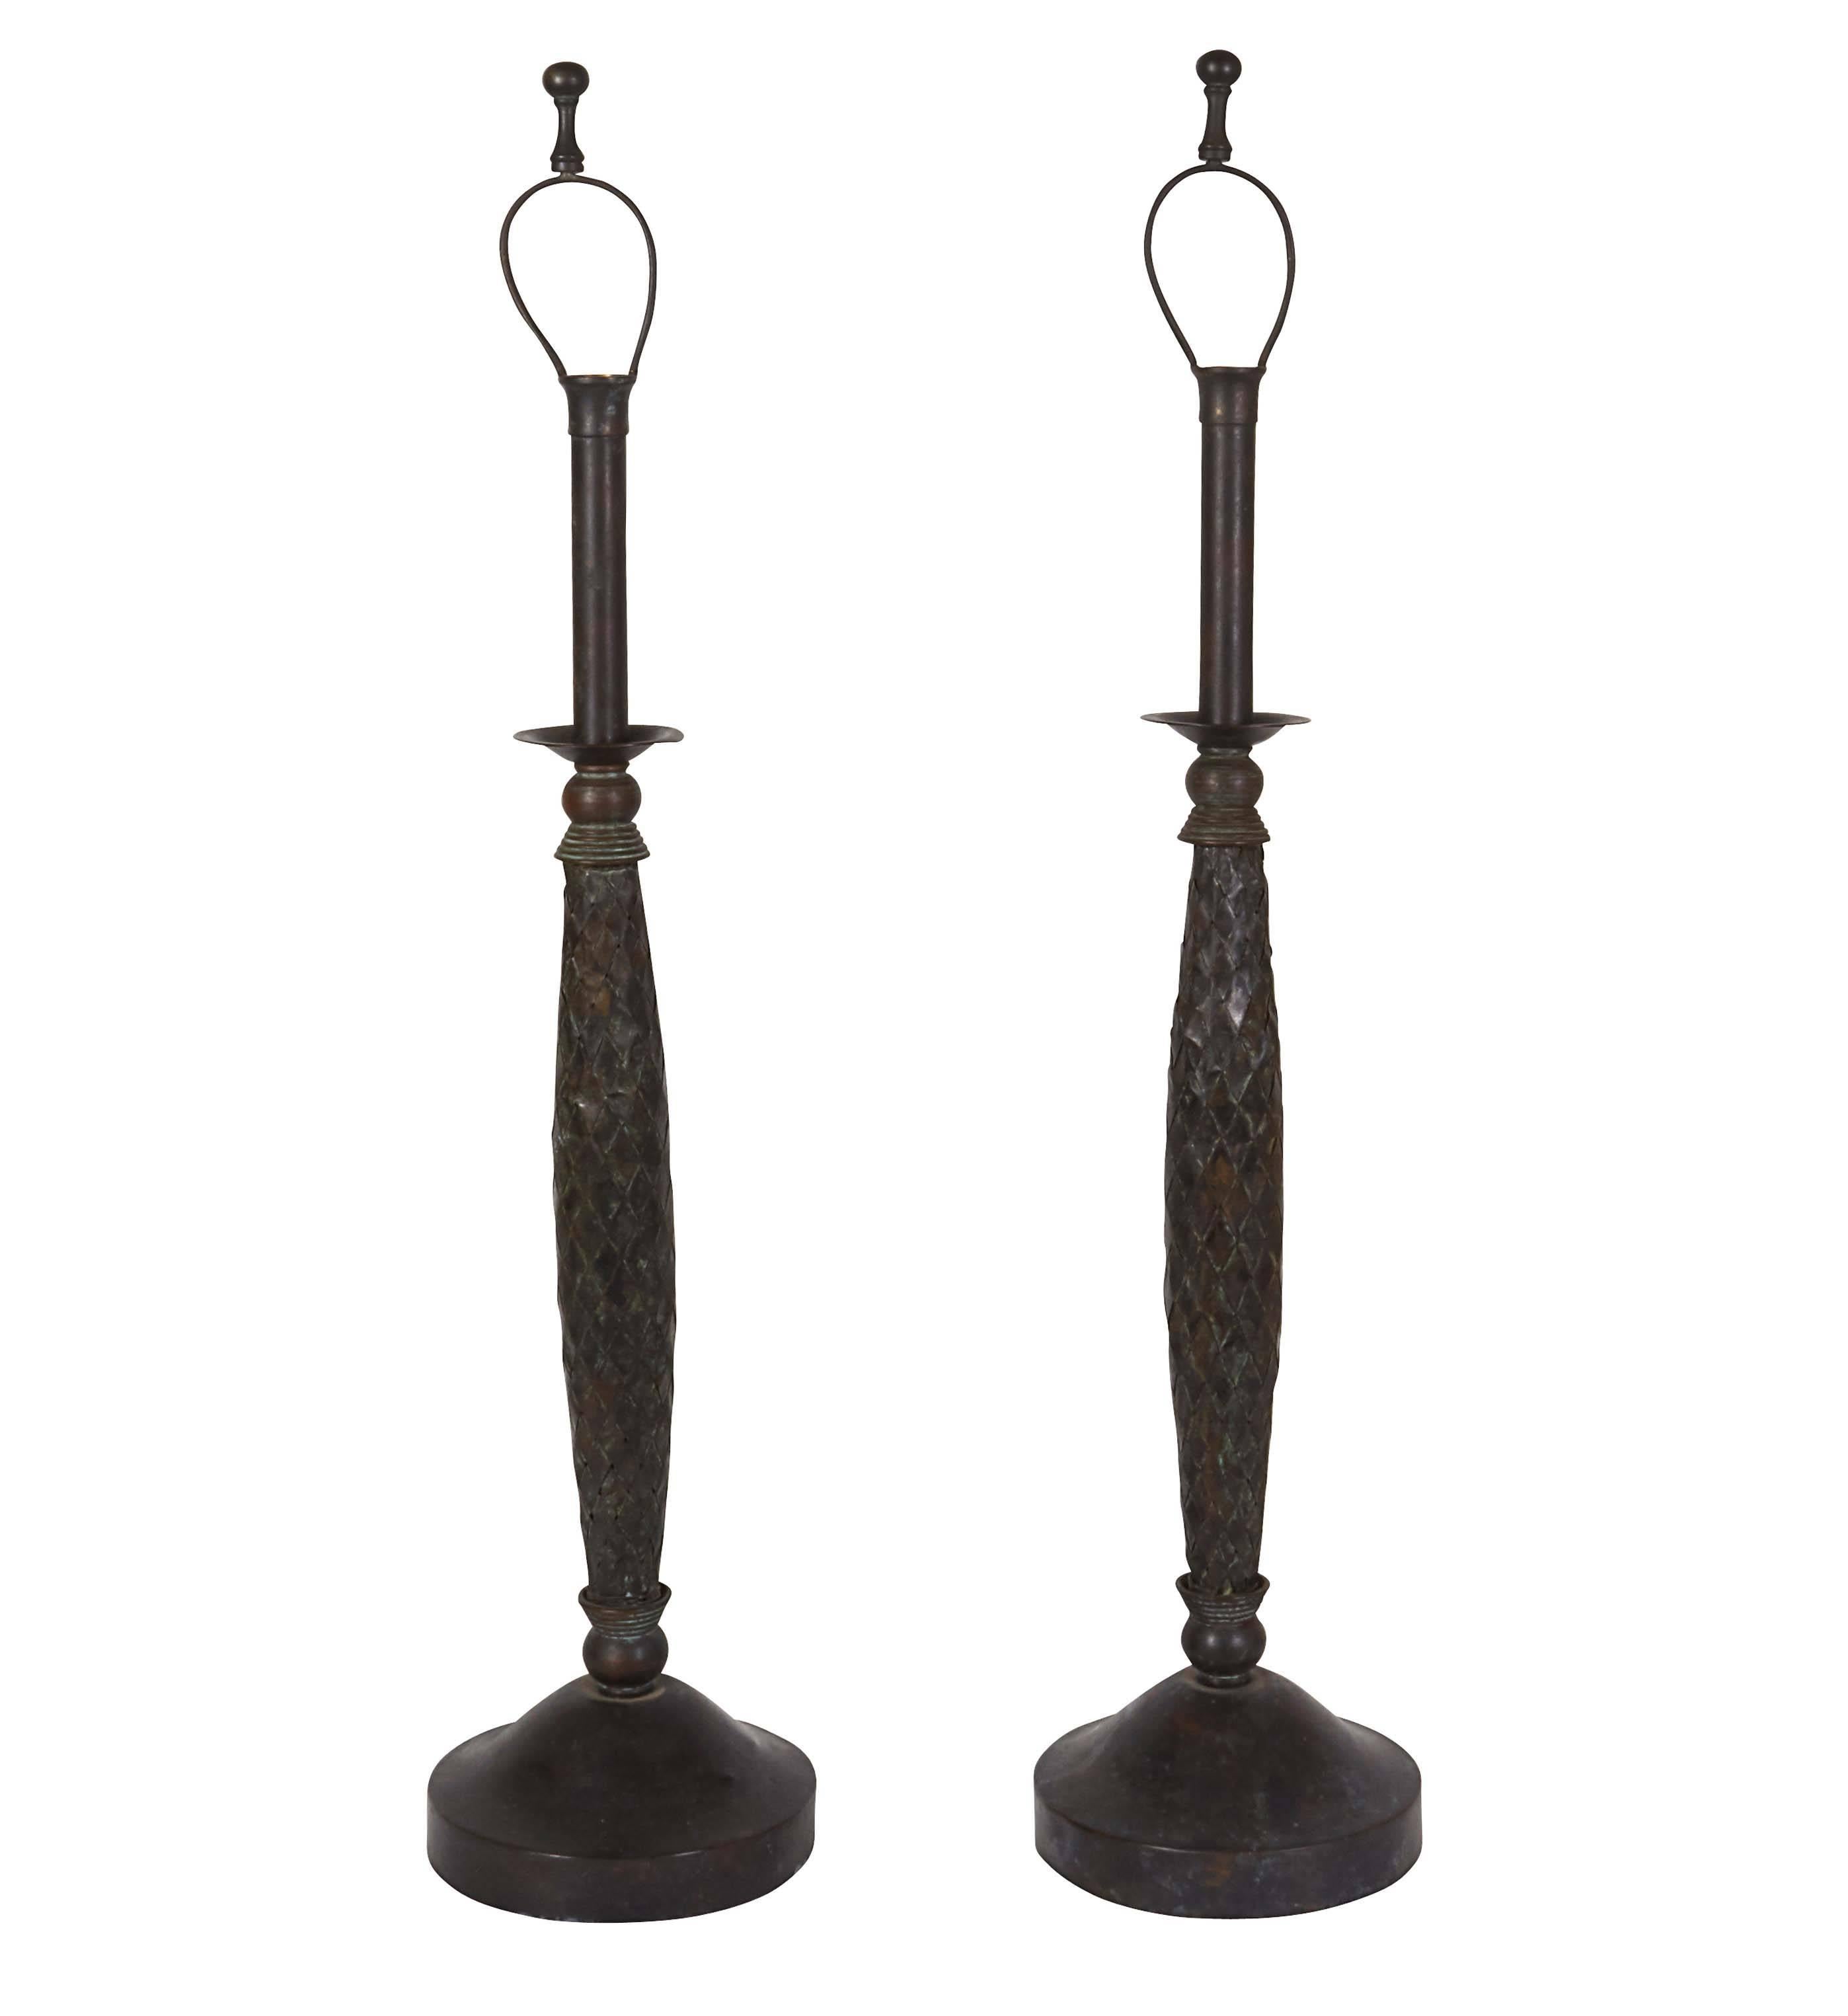 Pair of Maitland-Smith Candlestick Lamps in Patinated Woven Copper